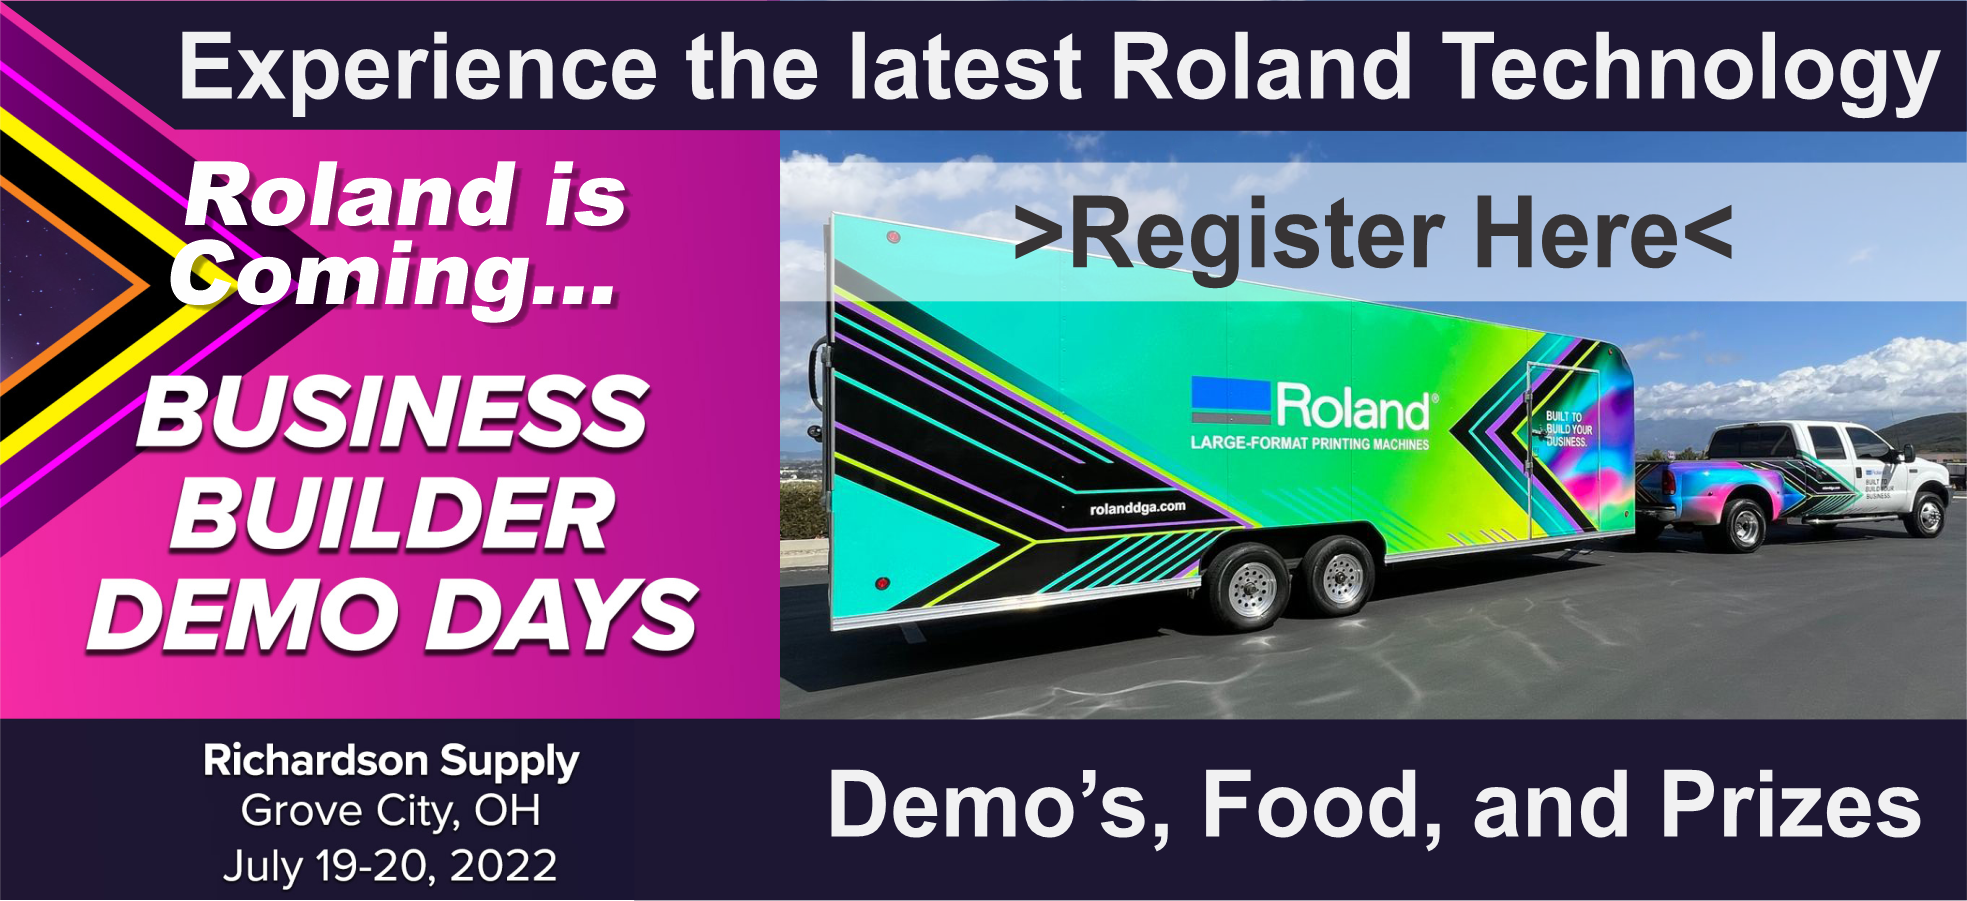 Roland Roadshow is coming